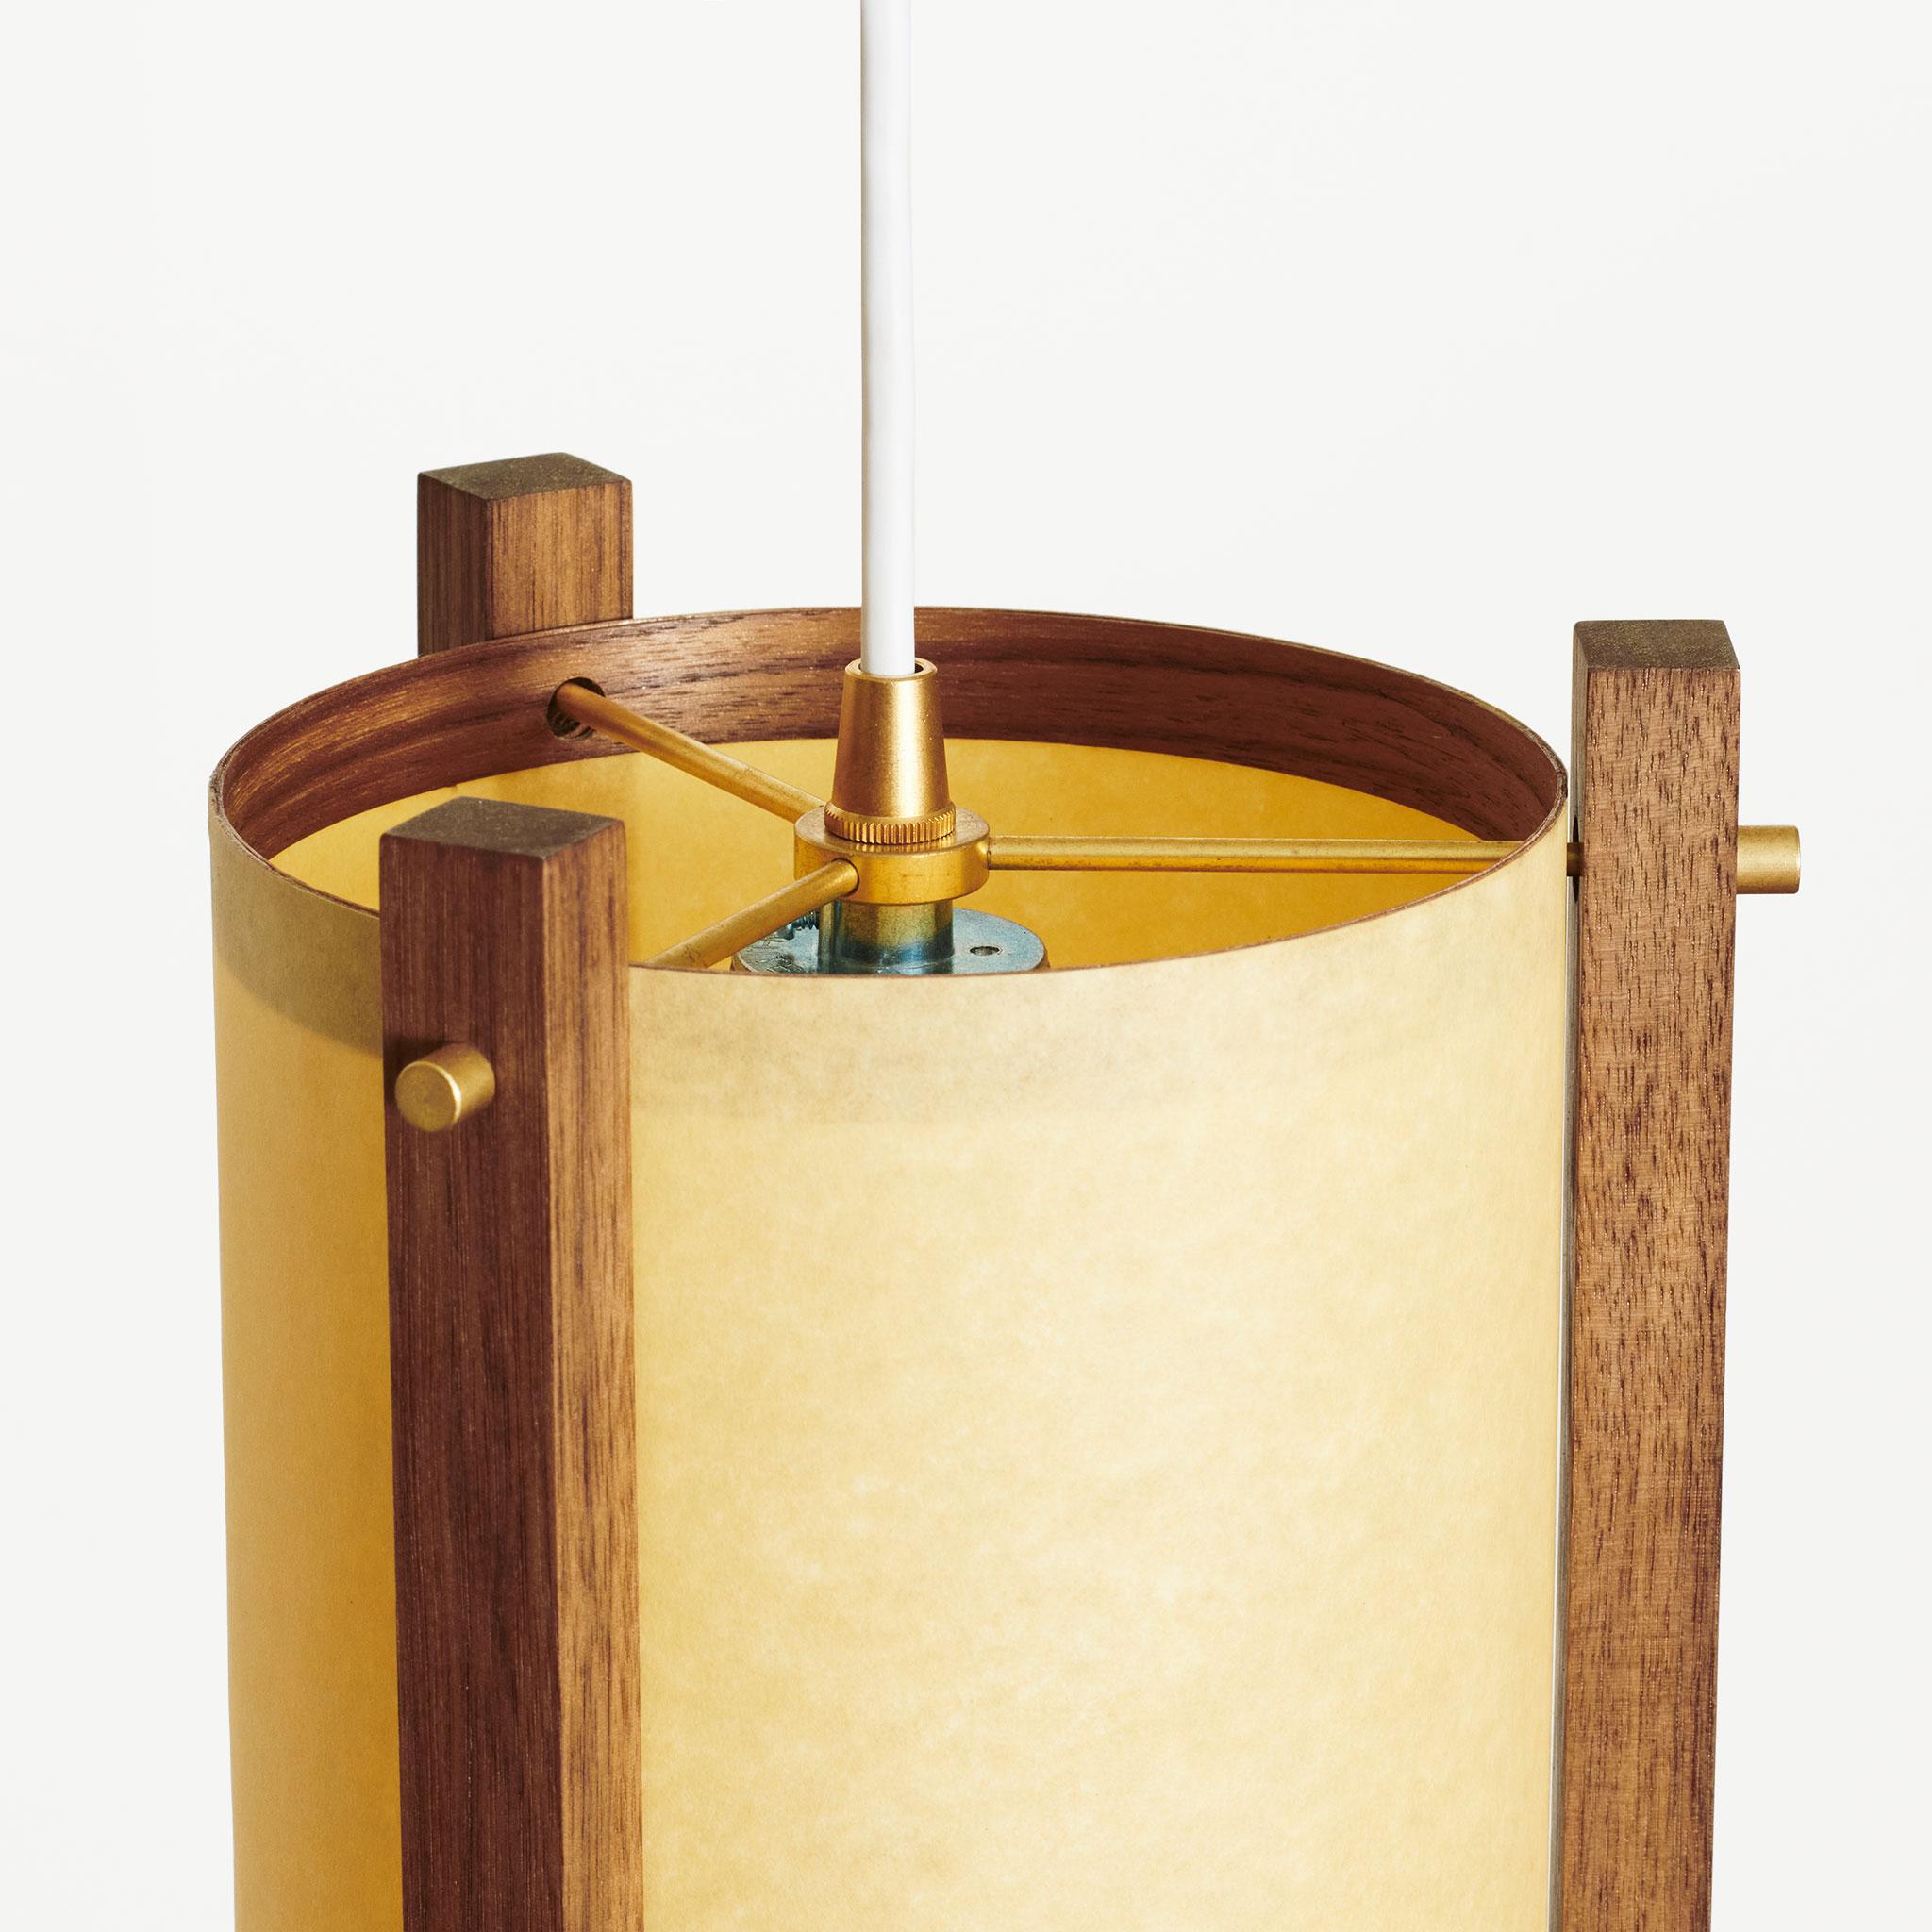 American Japanese inspired mid-century Walnut and Brass pendant lamp - small For Sale